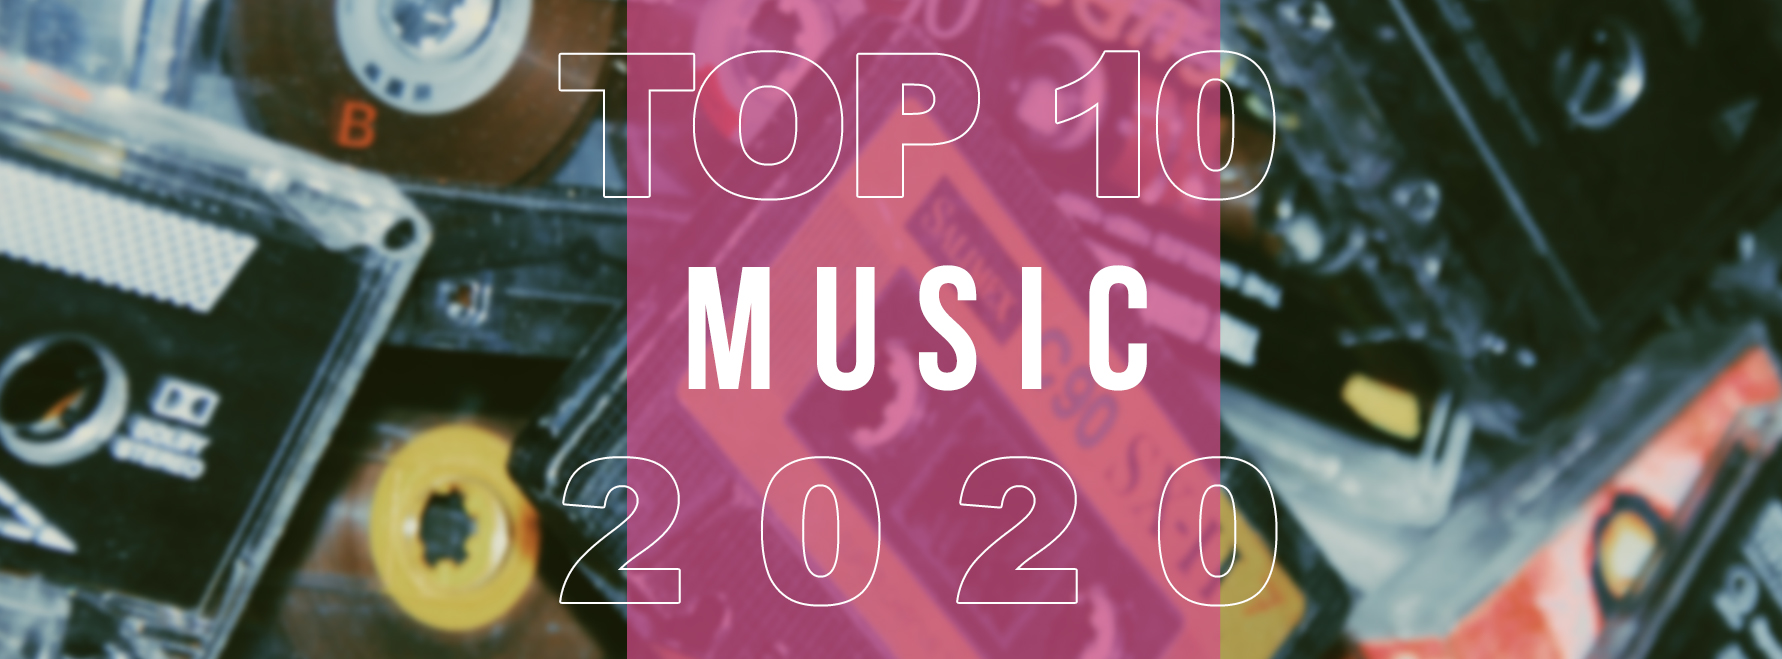 Top 10 Music of 2020